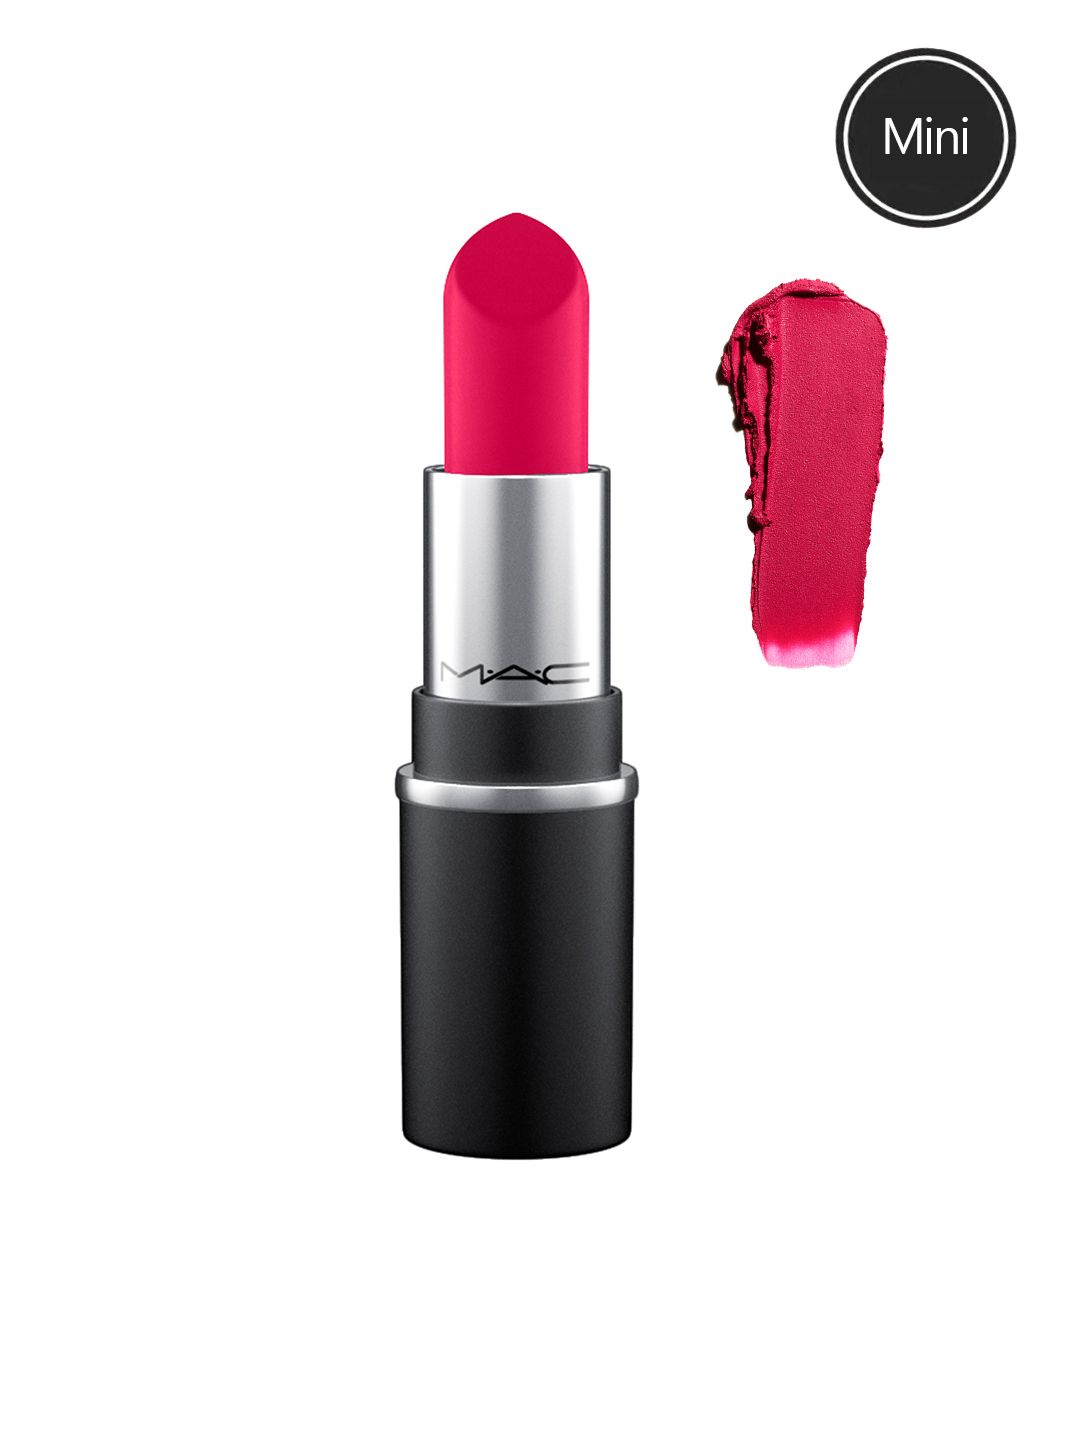 M.A.C Mini Satin Lipstick - All Fired Up 701 1.8 g Price in India